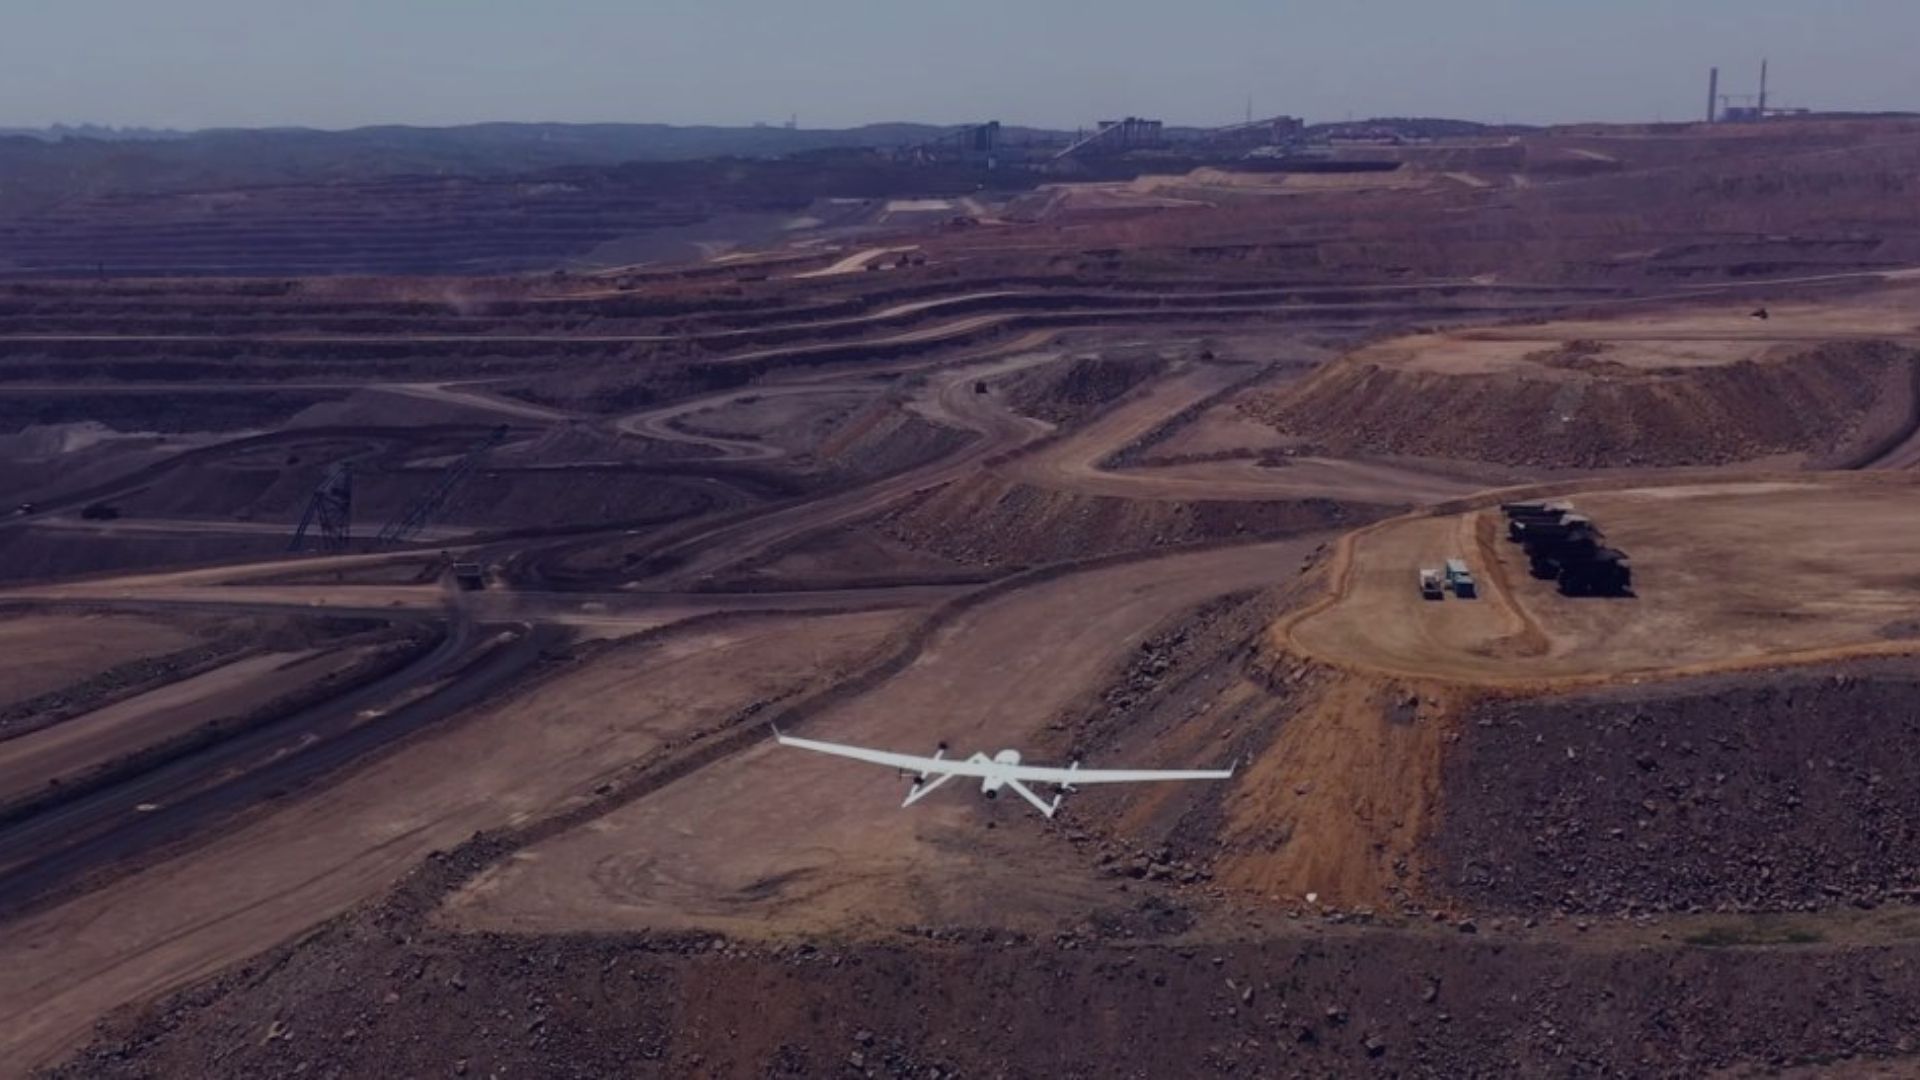 aircraft drone flyy in sky Surveying in a Mining Site